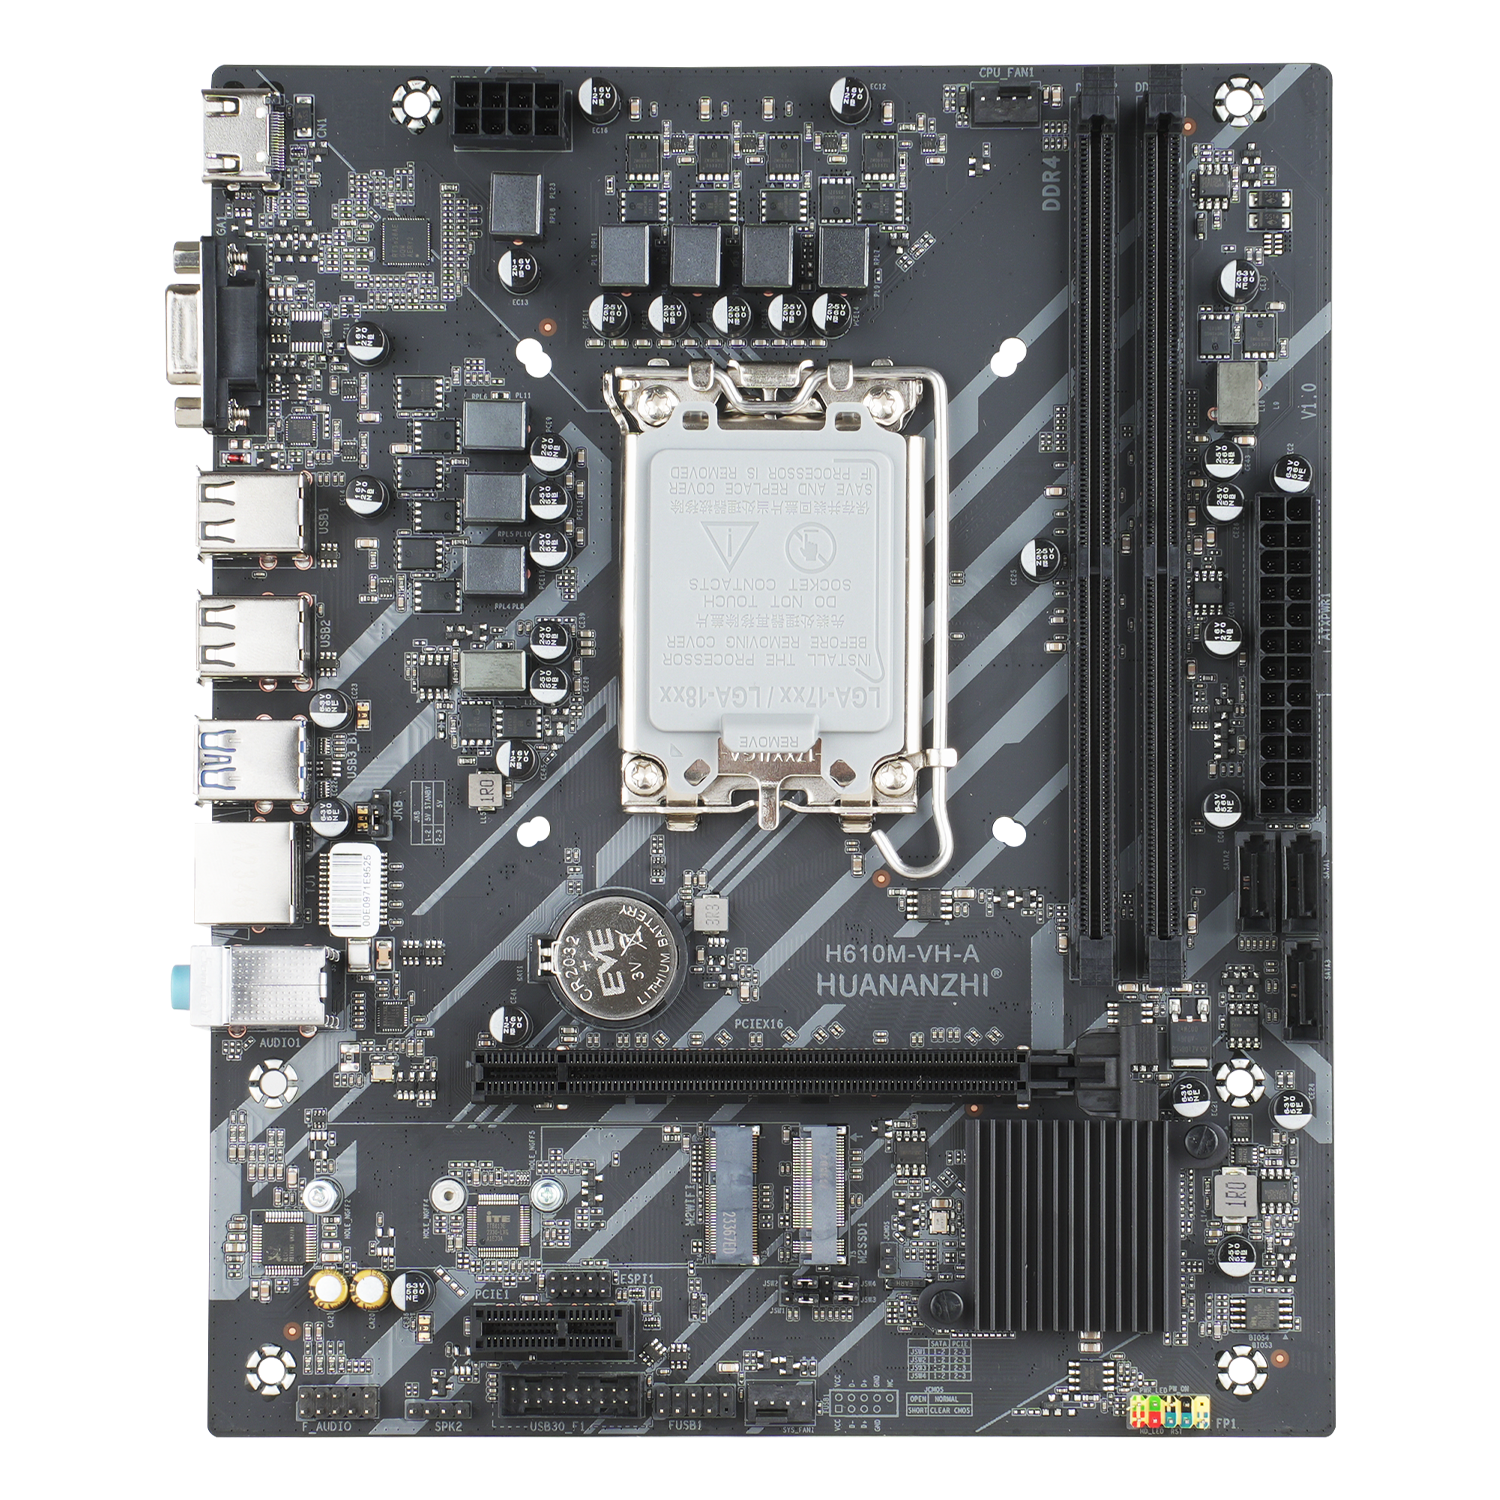 HUANANZHI H610M-VH-A Motherboard